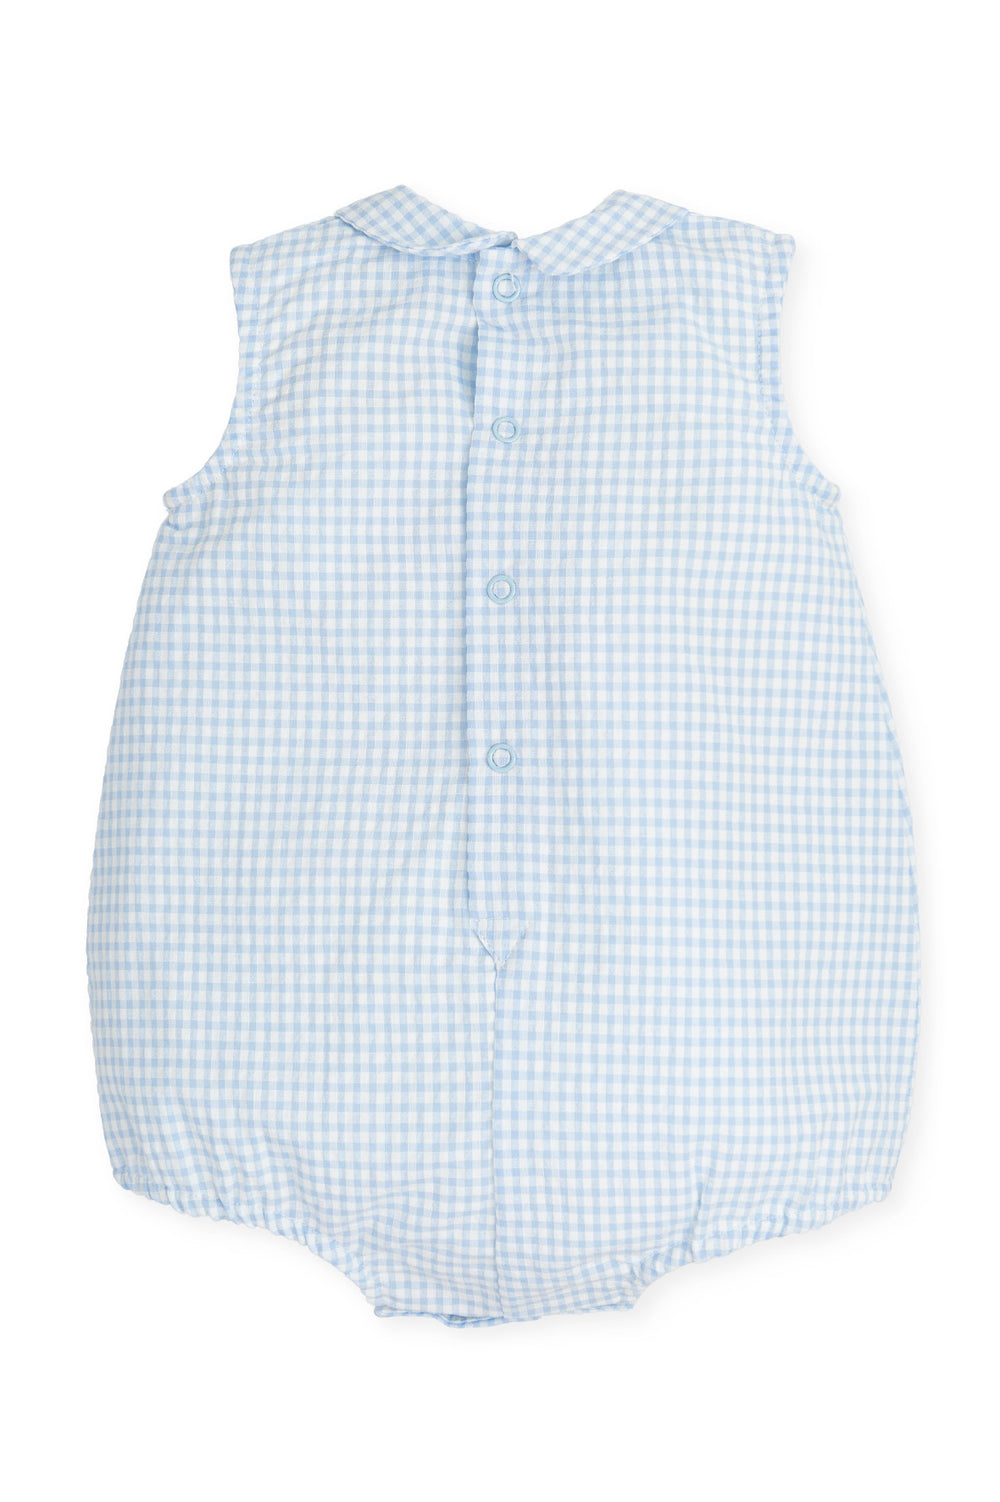 Tutto Piccolo "Harry" Blue Gingham Romper | Millie and John